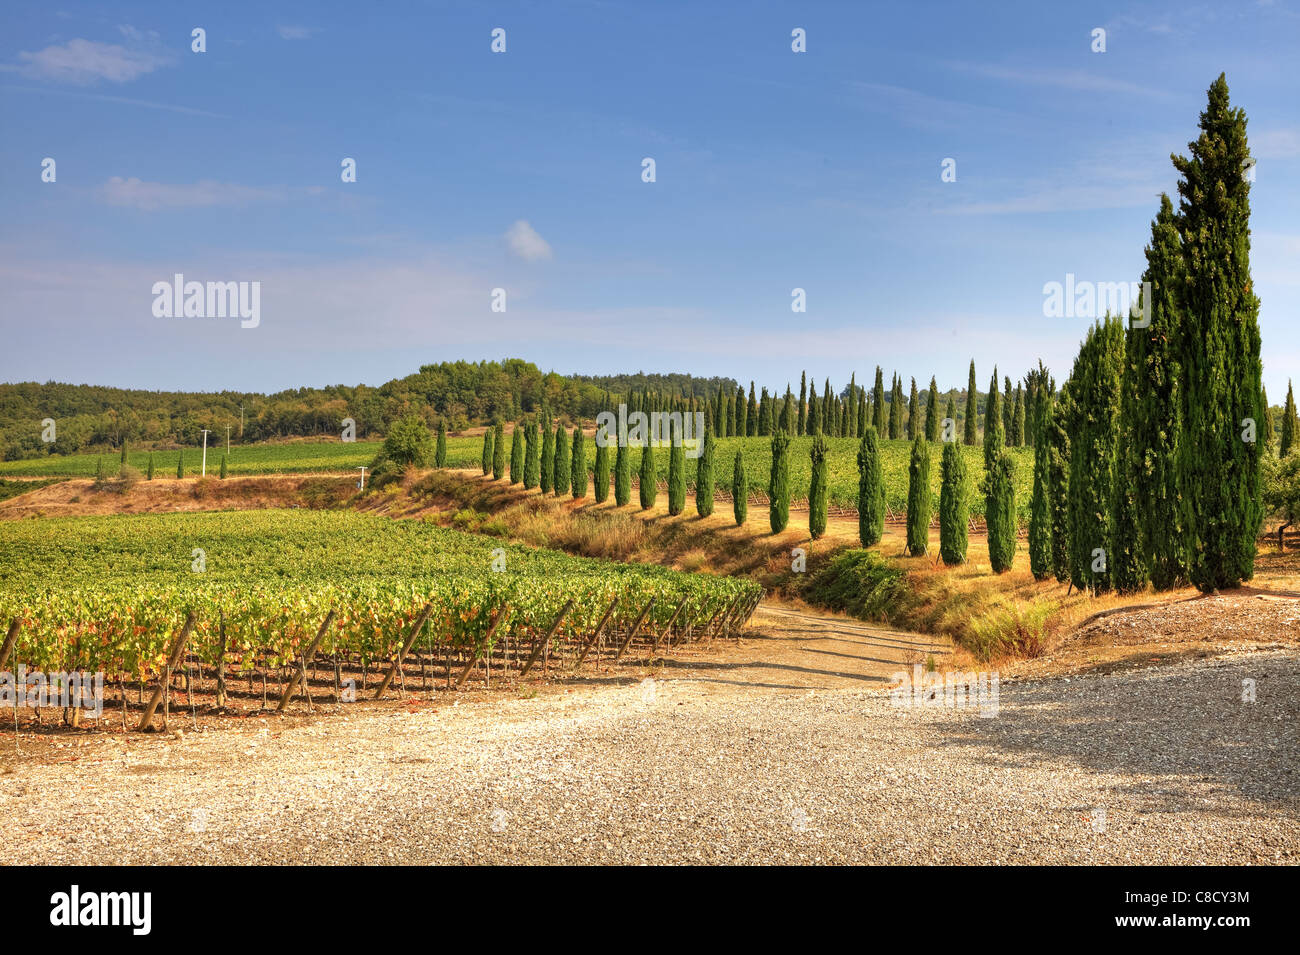 Agriculture in Tuscany - vineyards Stock Photo